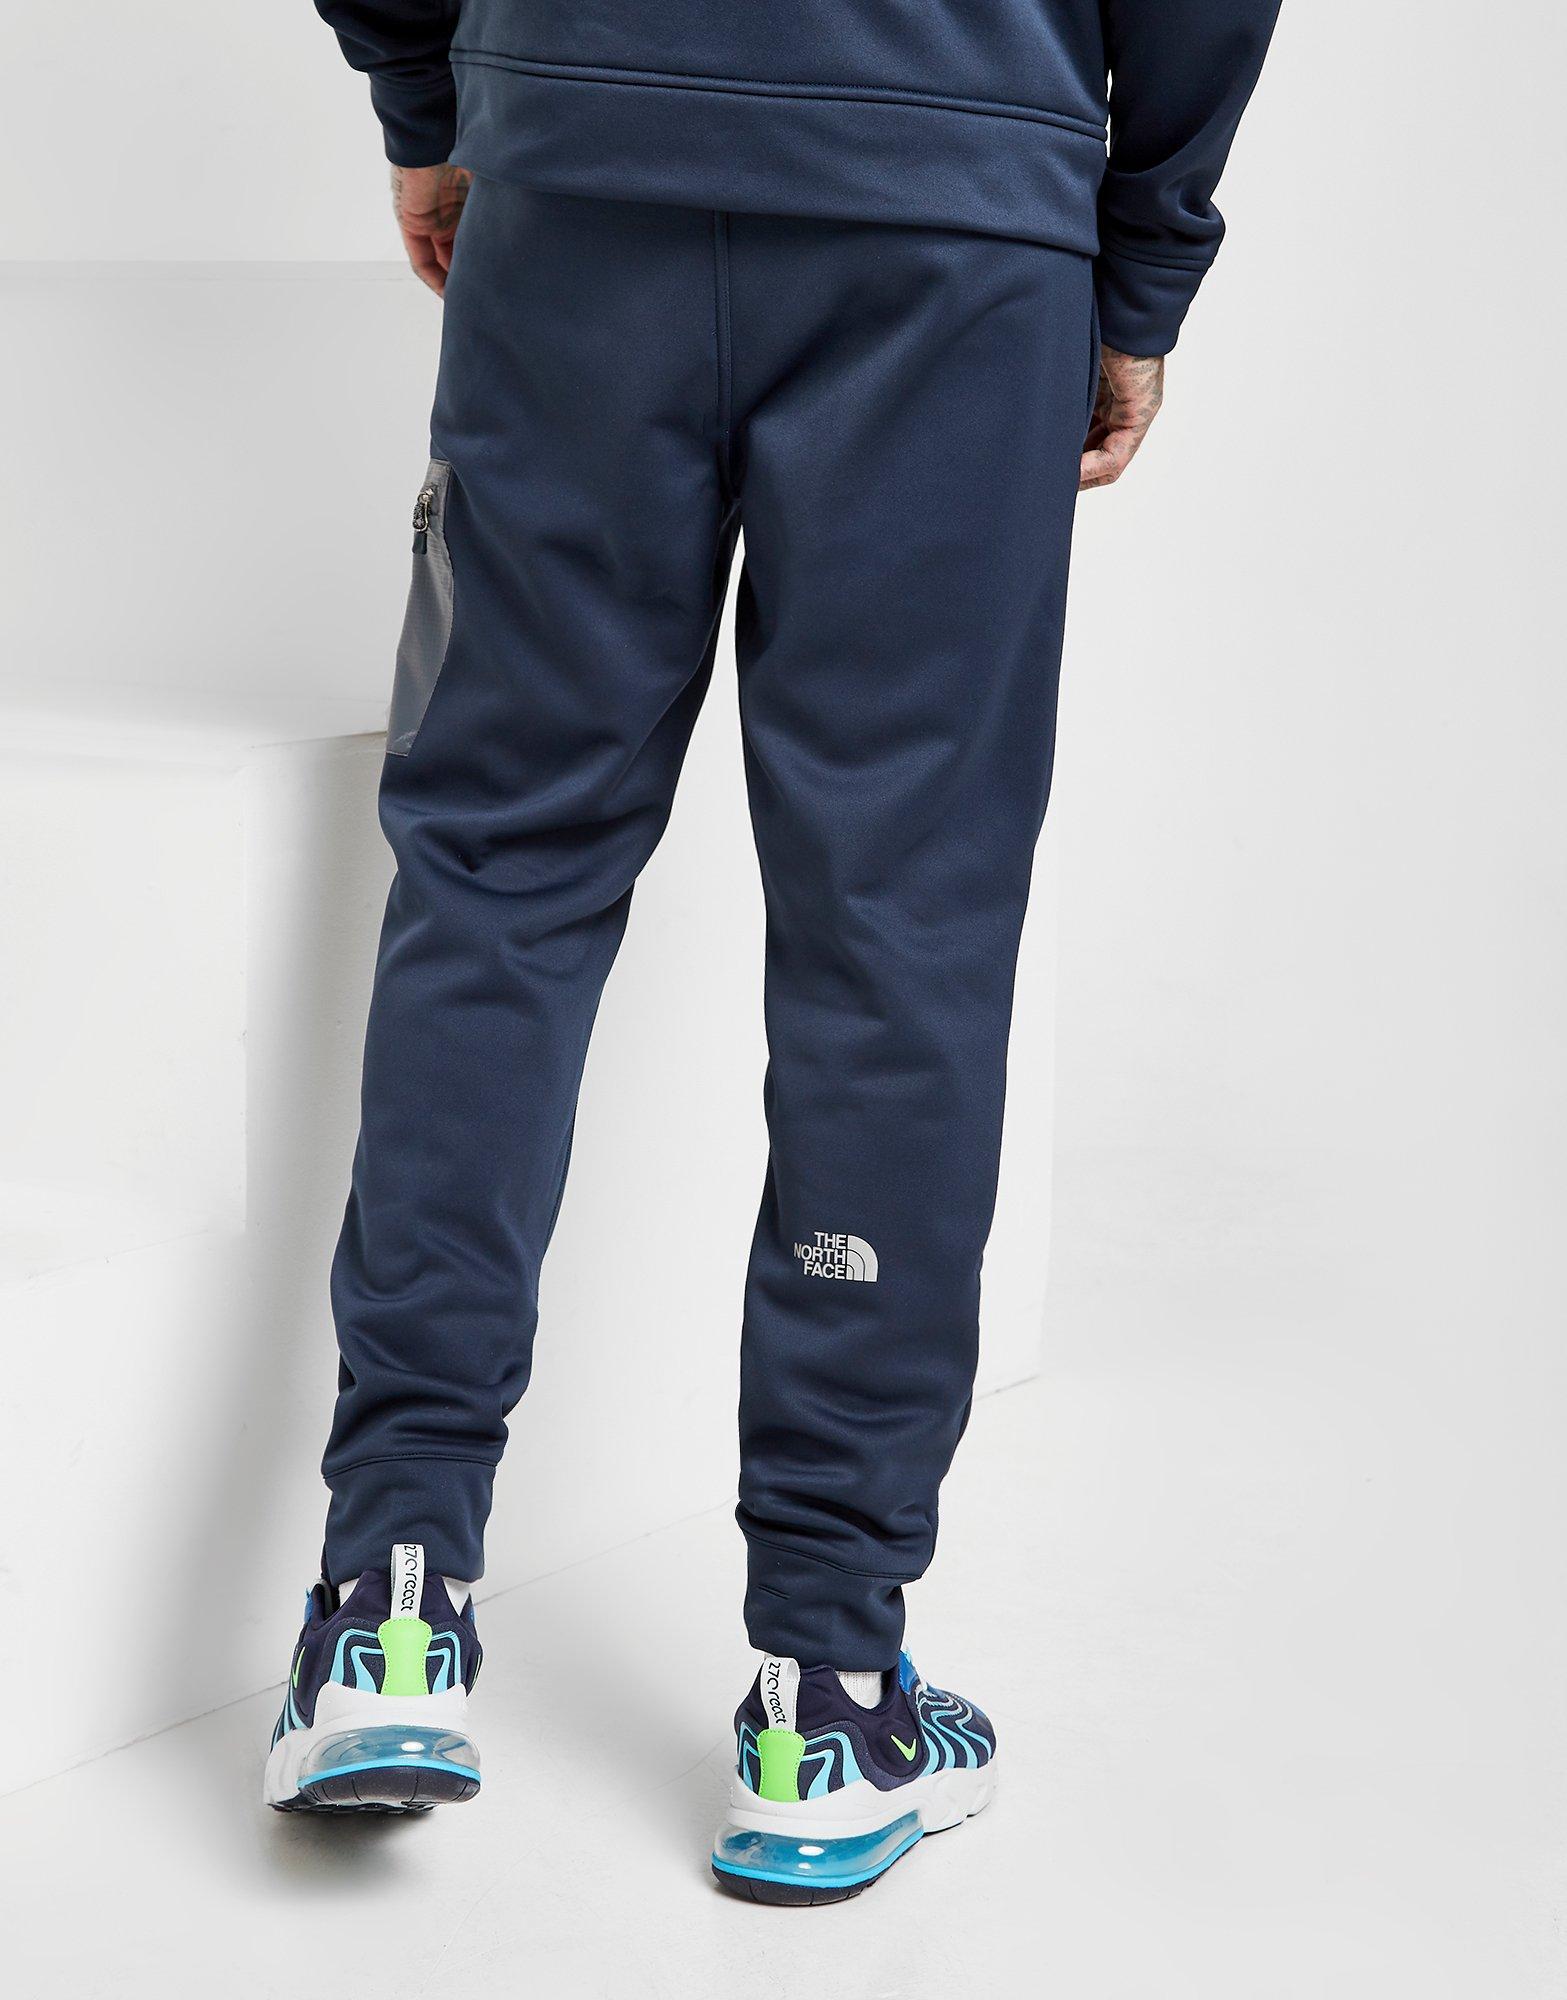 north face woven pants